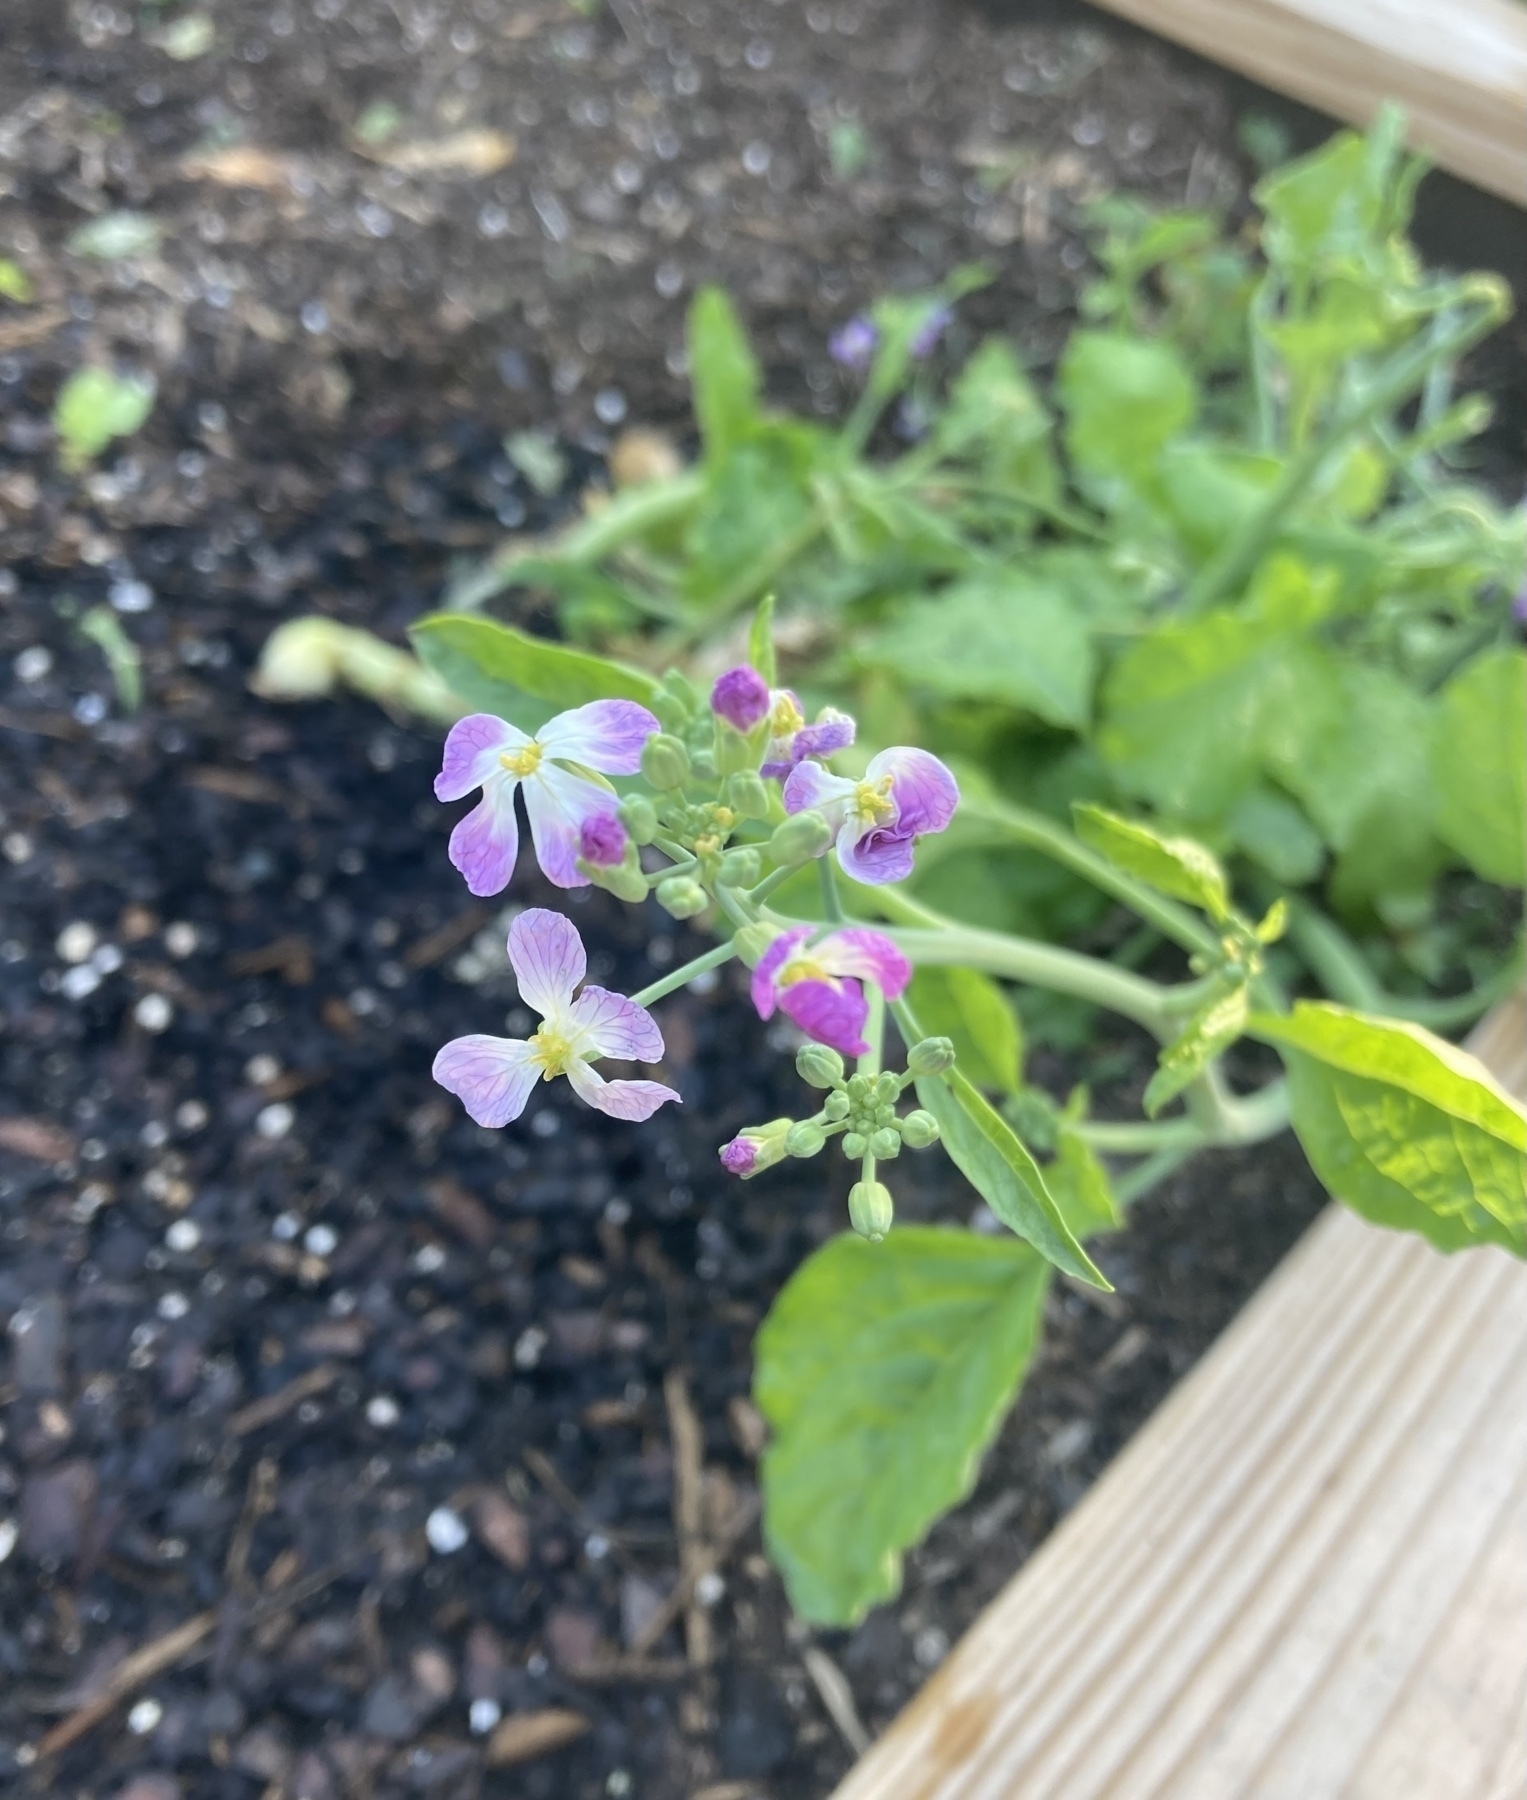 delicate purple flowers, scraggly greens at the edge of a raised garden bed